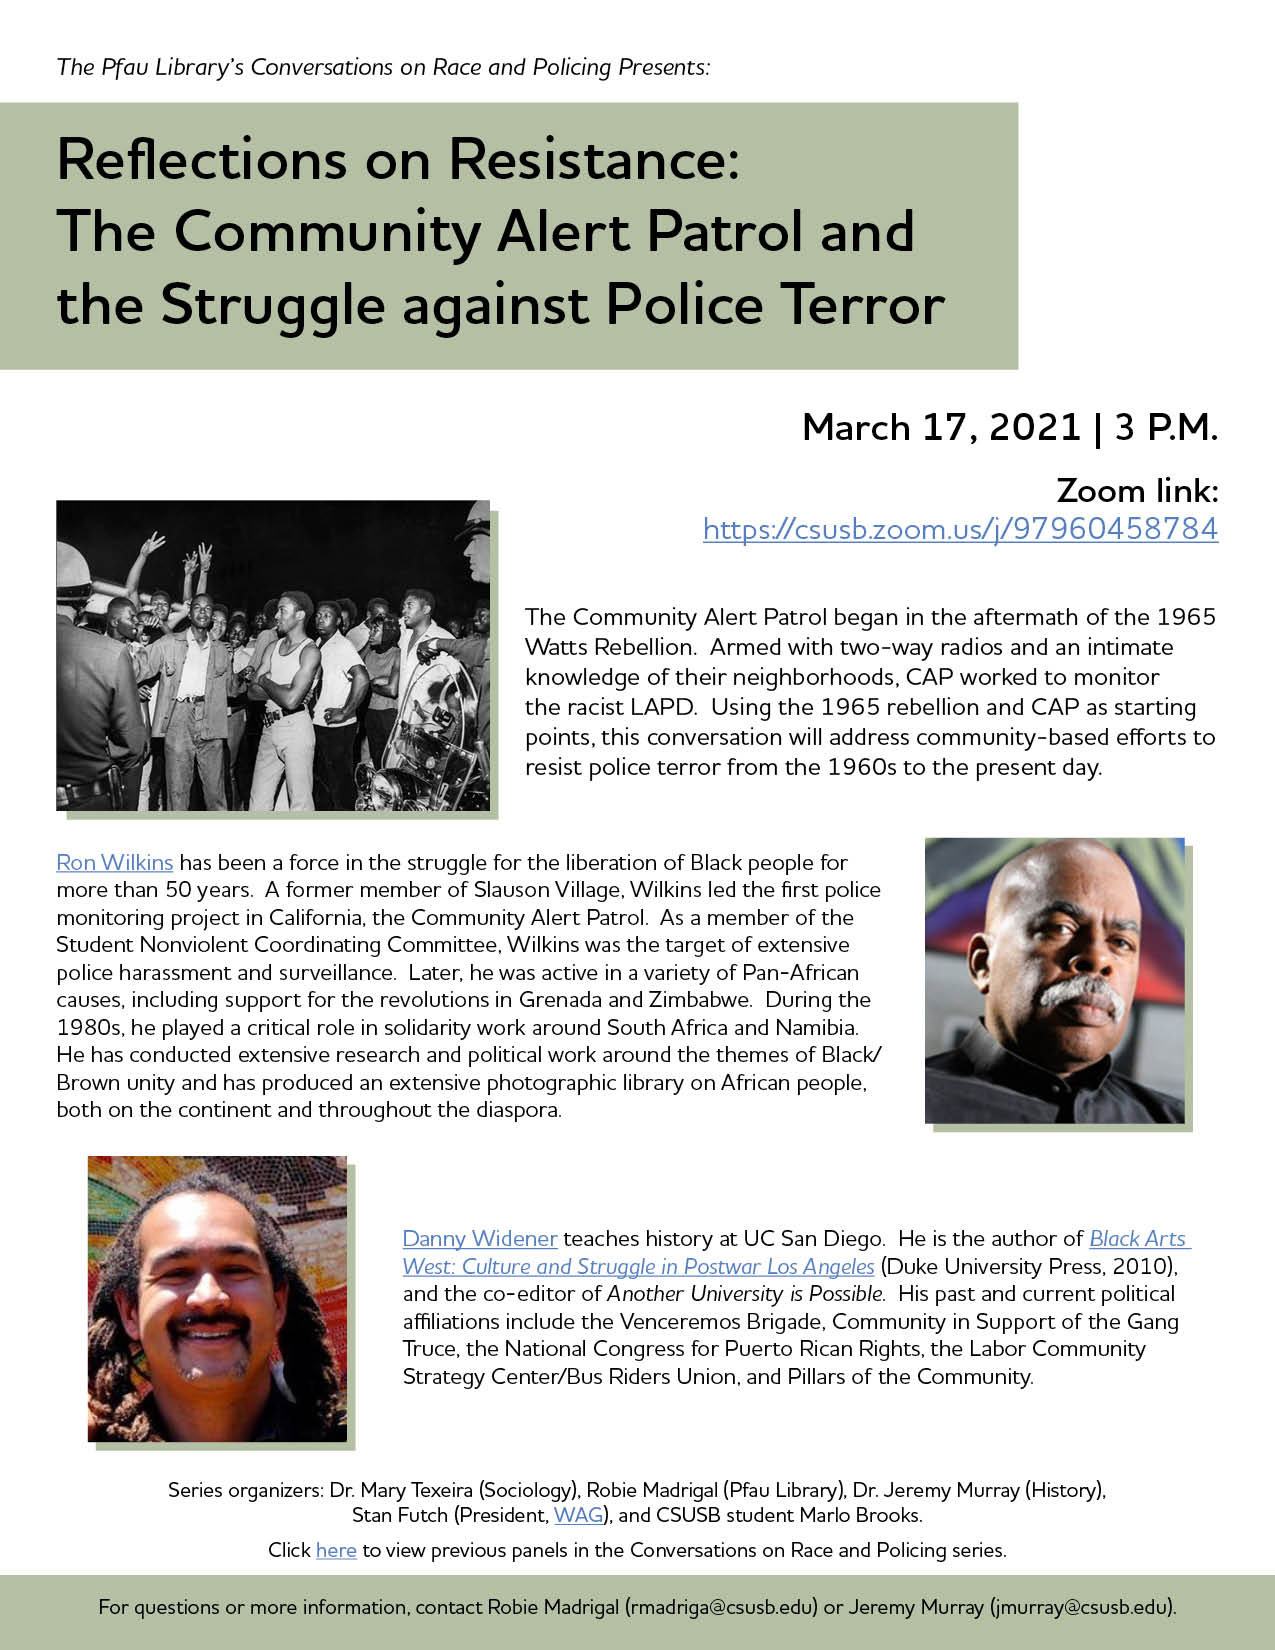 March 17 Conversations on Race and Policing event flyer